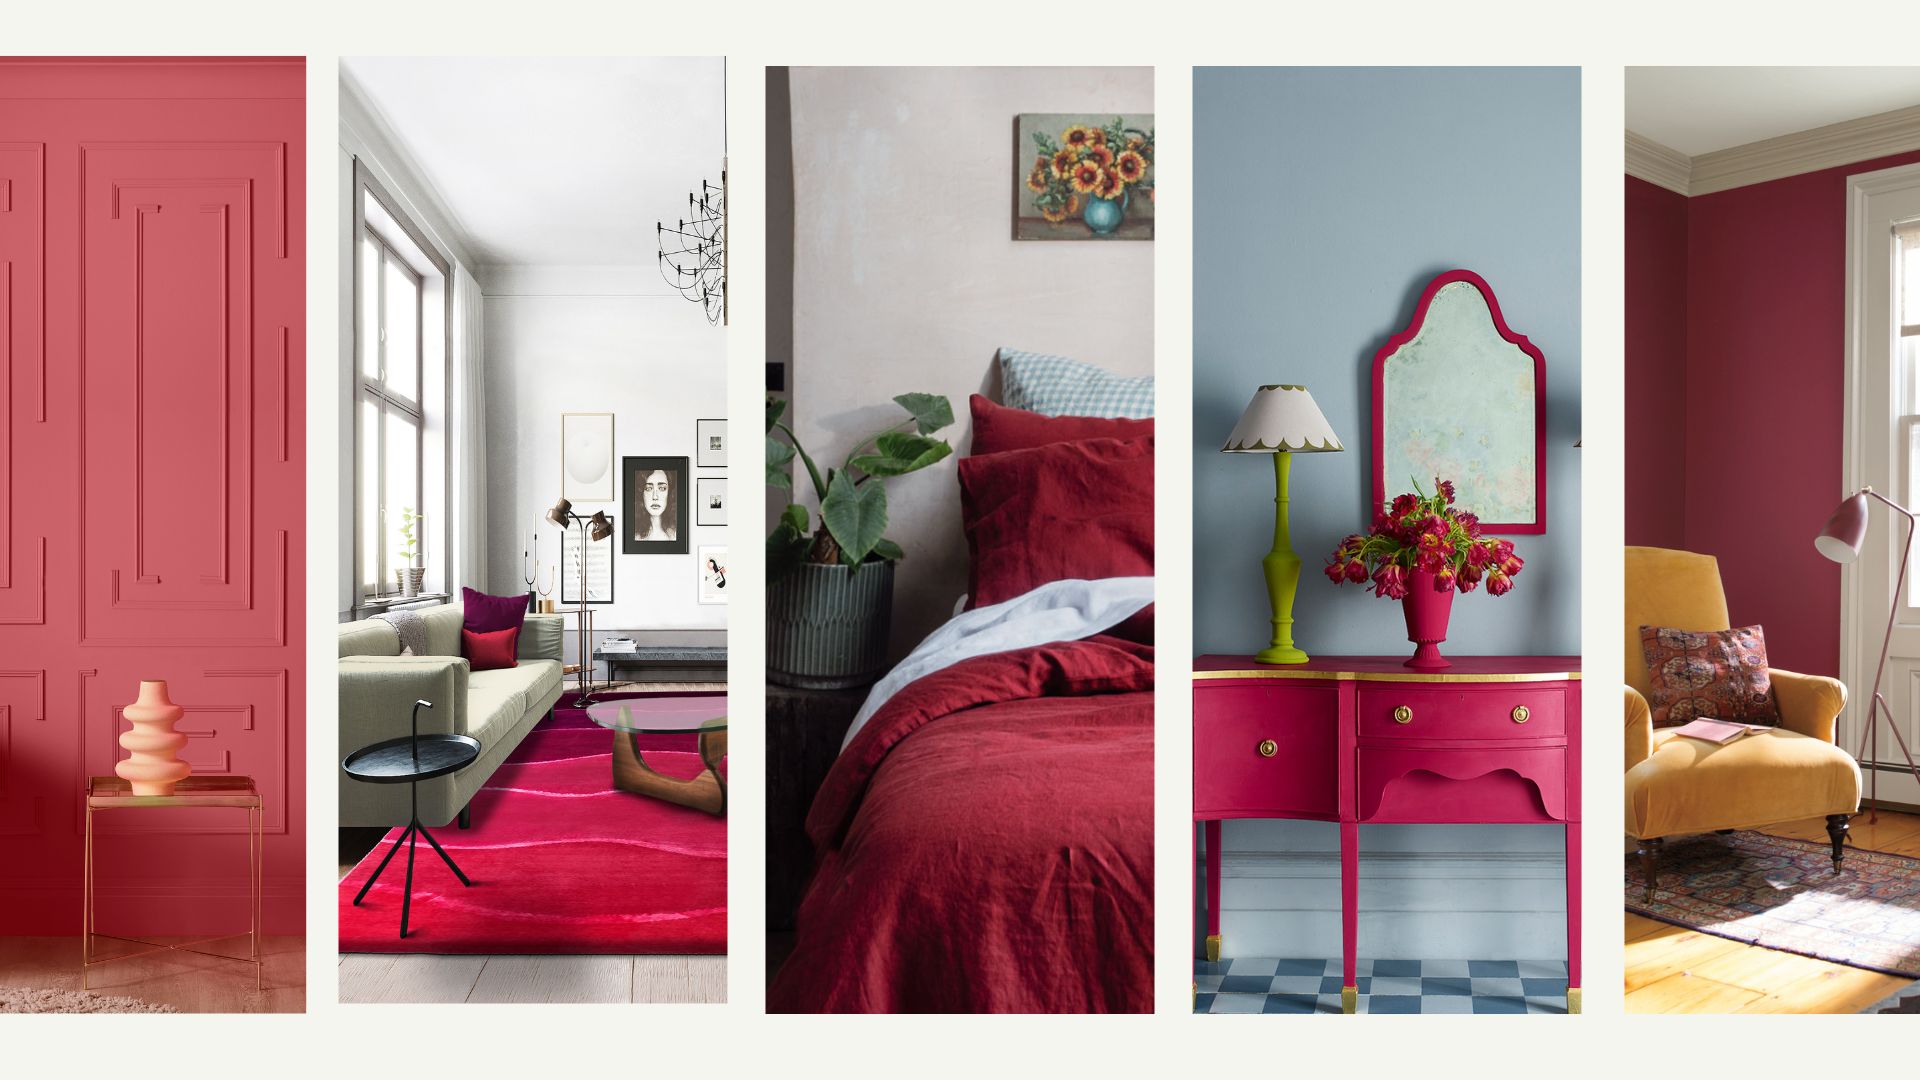 How to use Viva Magenta - Pantone Color of the Year 2023 in your